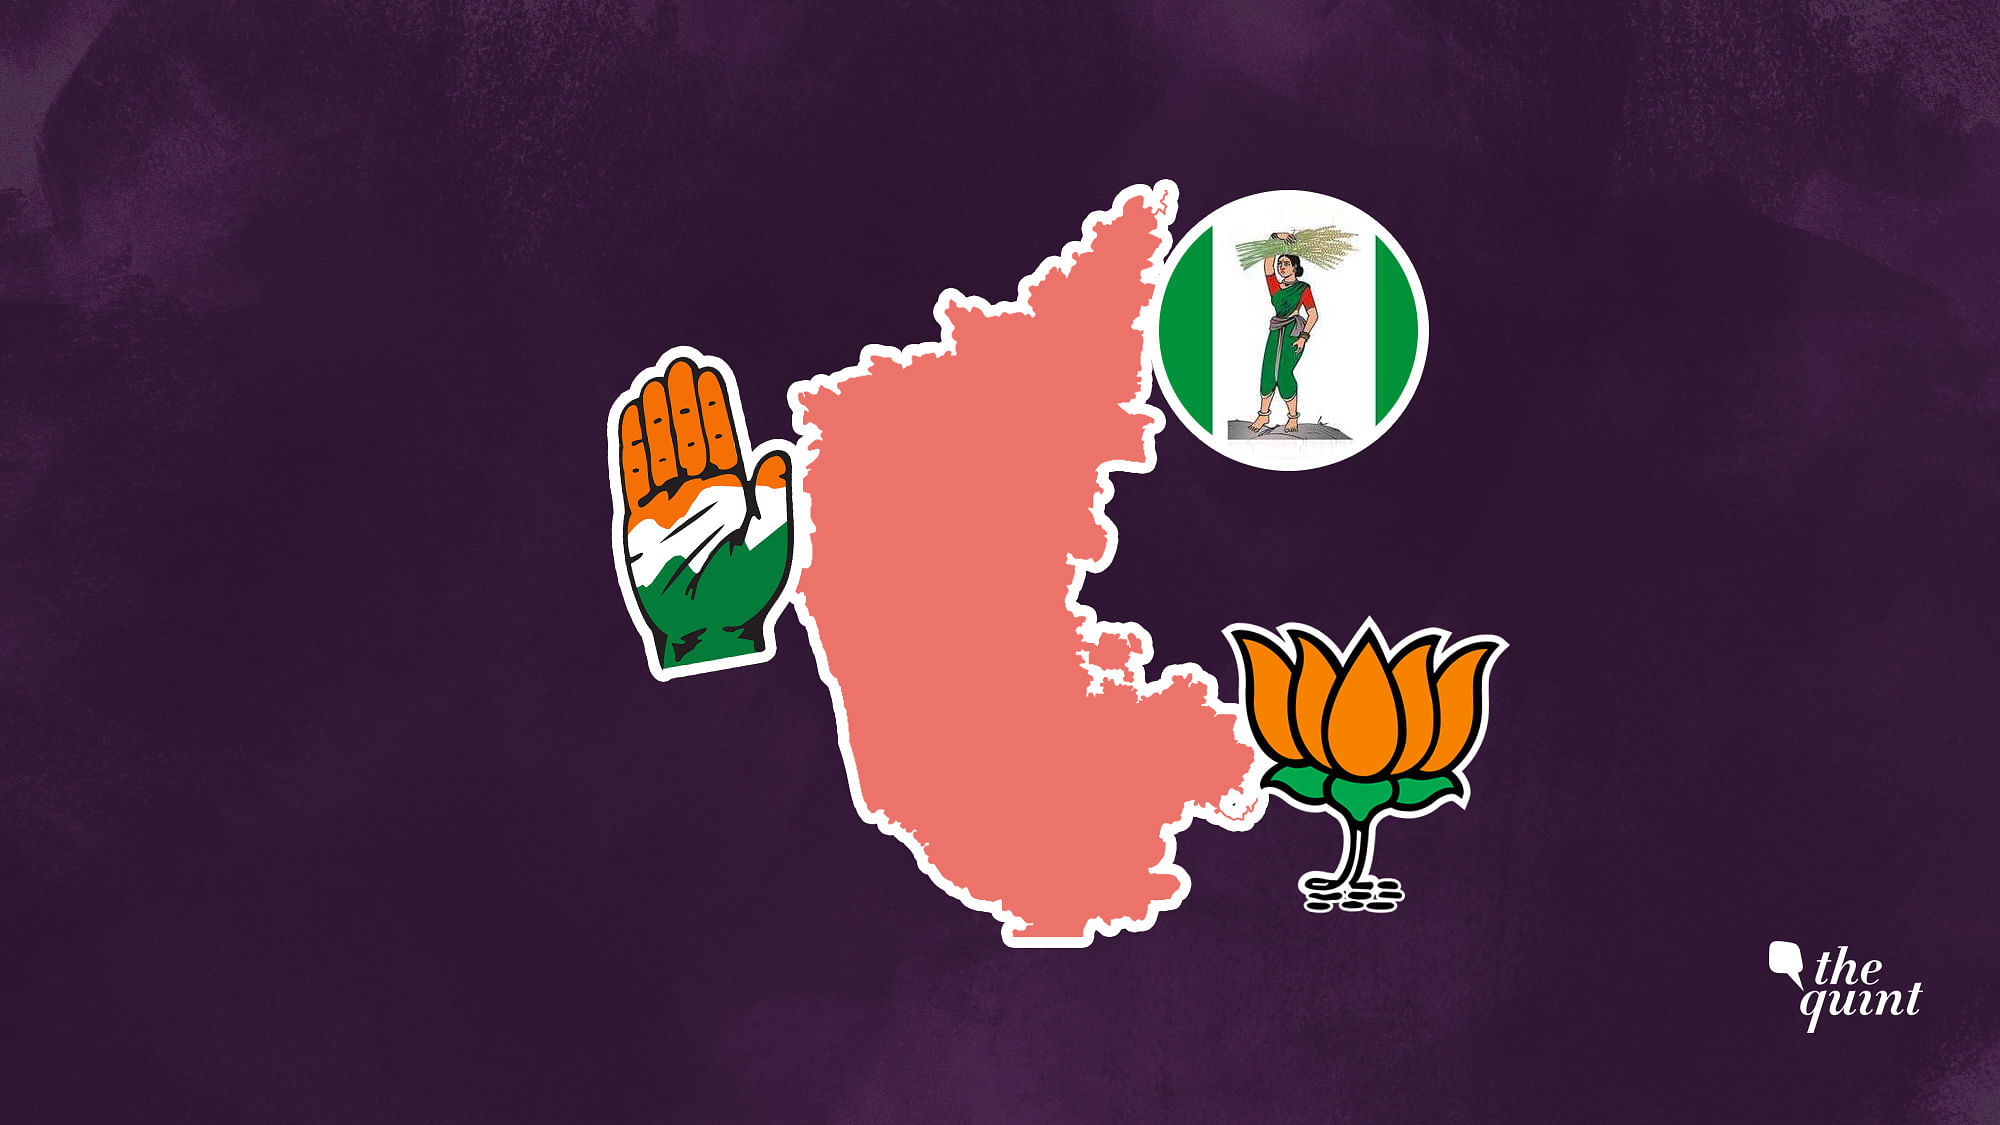 The Congress’ list of candidates for the Karnataka elections saw 84 percent of the sitting MLAs getting tickets again – and three children of serving ministers making their political debut.